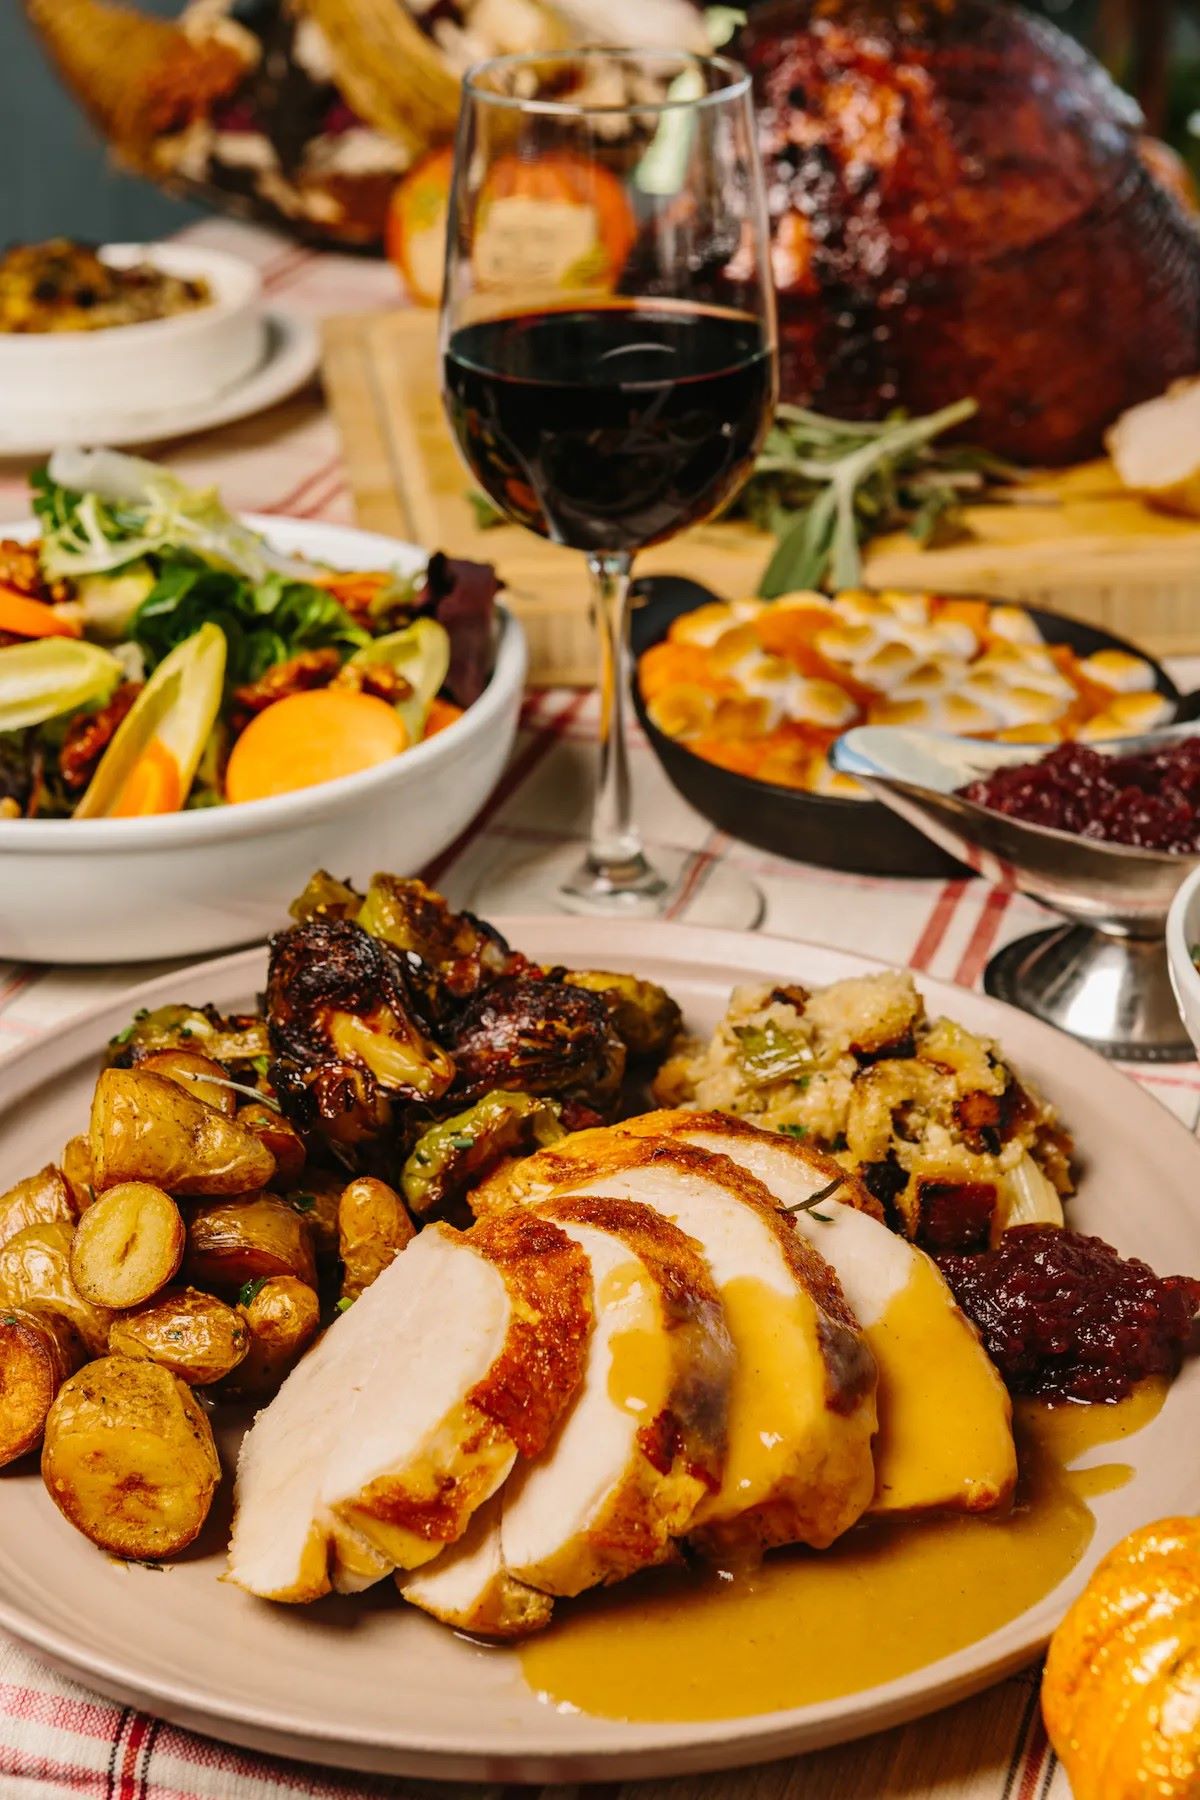 An image of the Thanksgiving platter from Sea Level Restaurant.